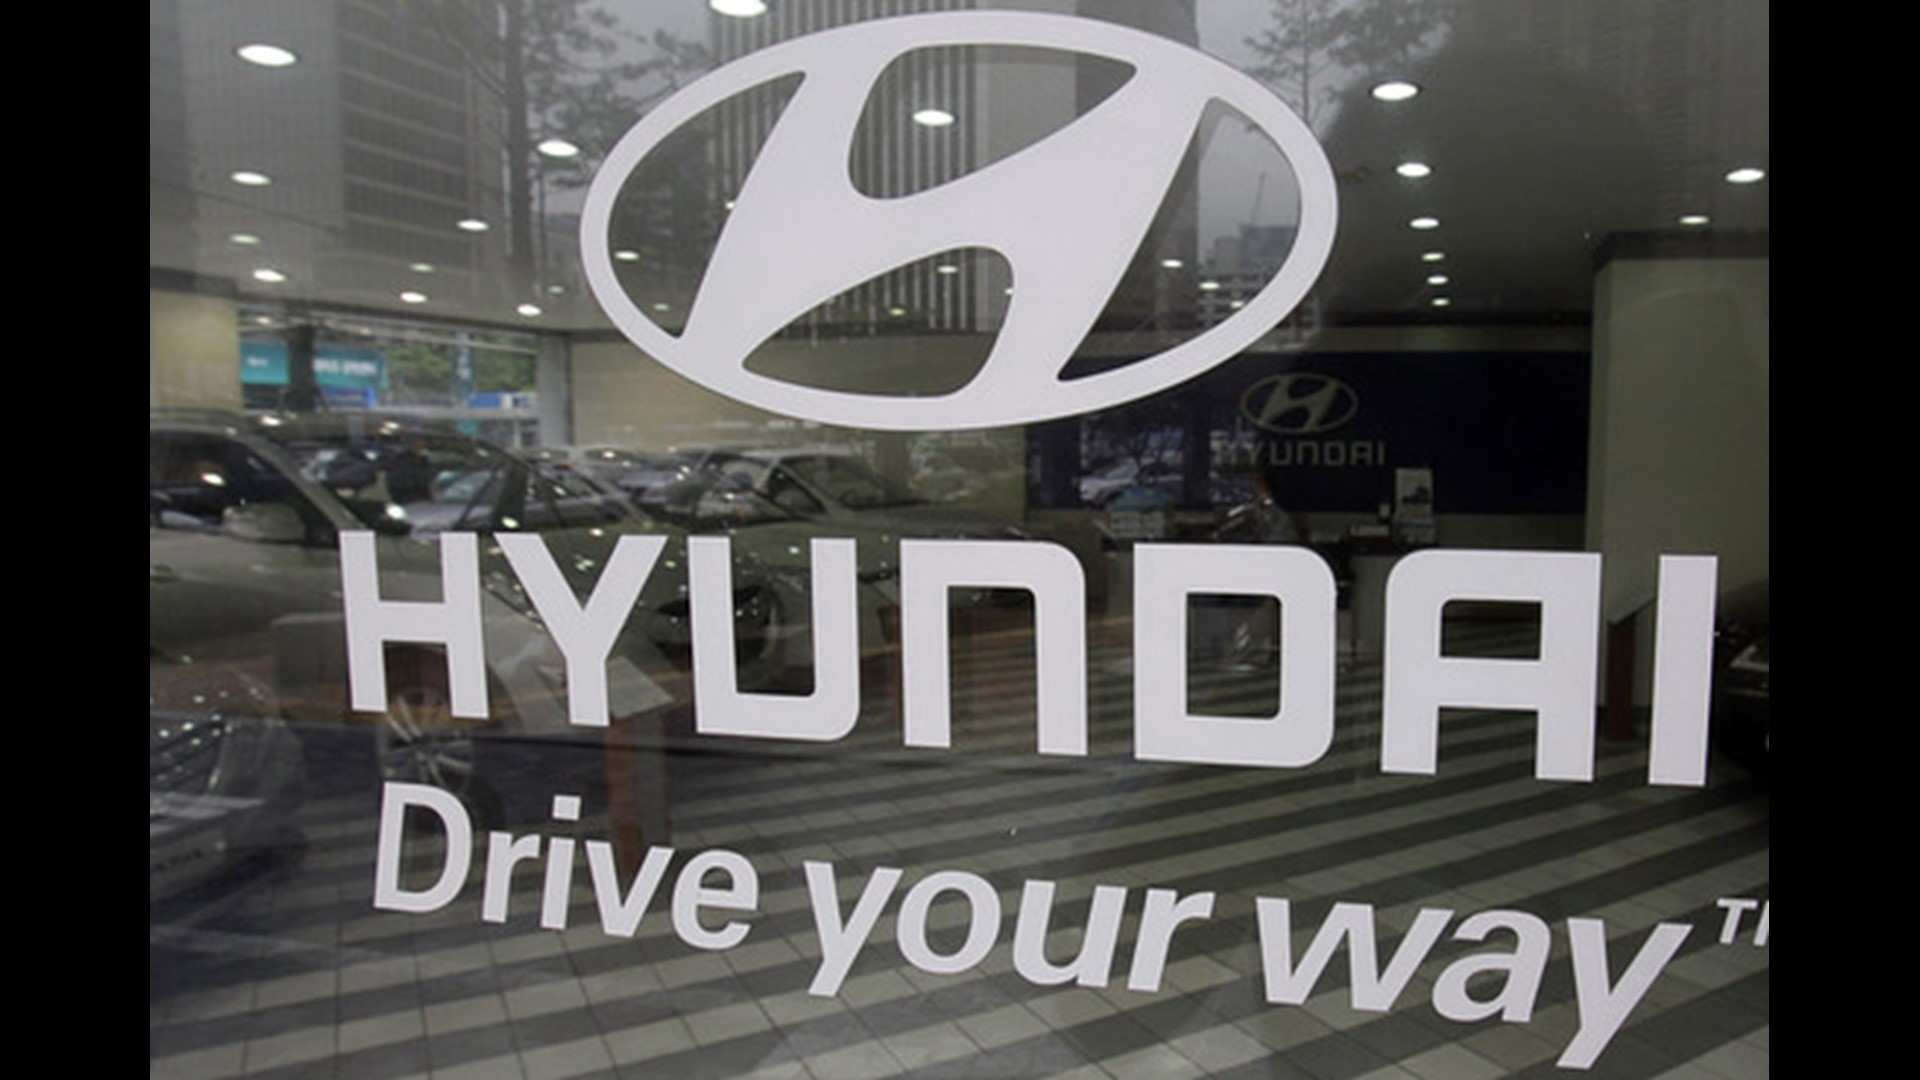 Korean automakers Kia and Hyundai are recalling tens of thousands of vehicles due to the risk of engine fires. Here's what you need to know.